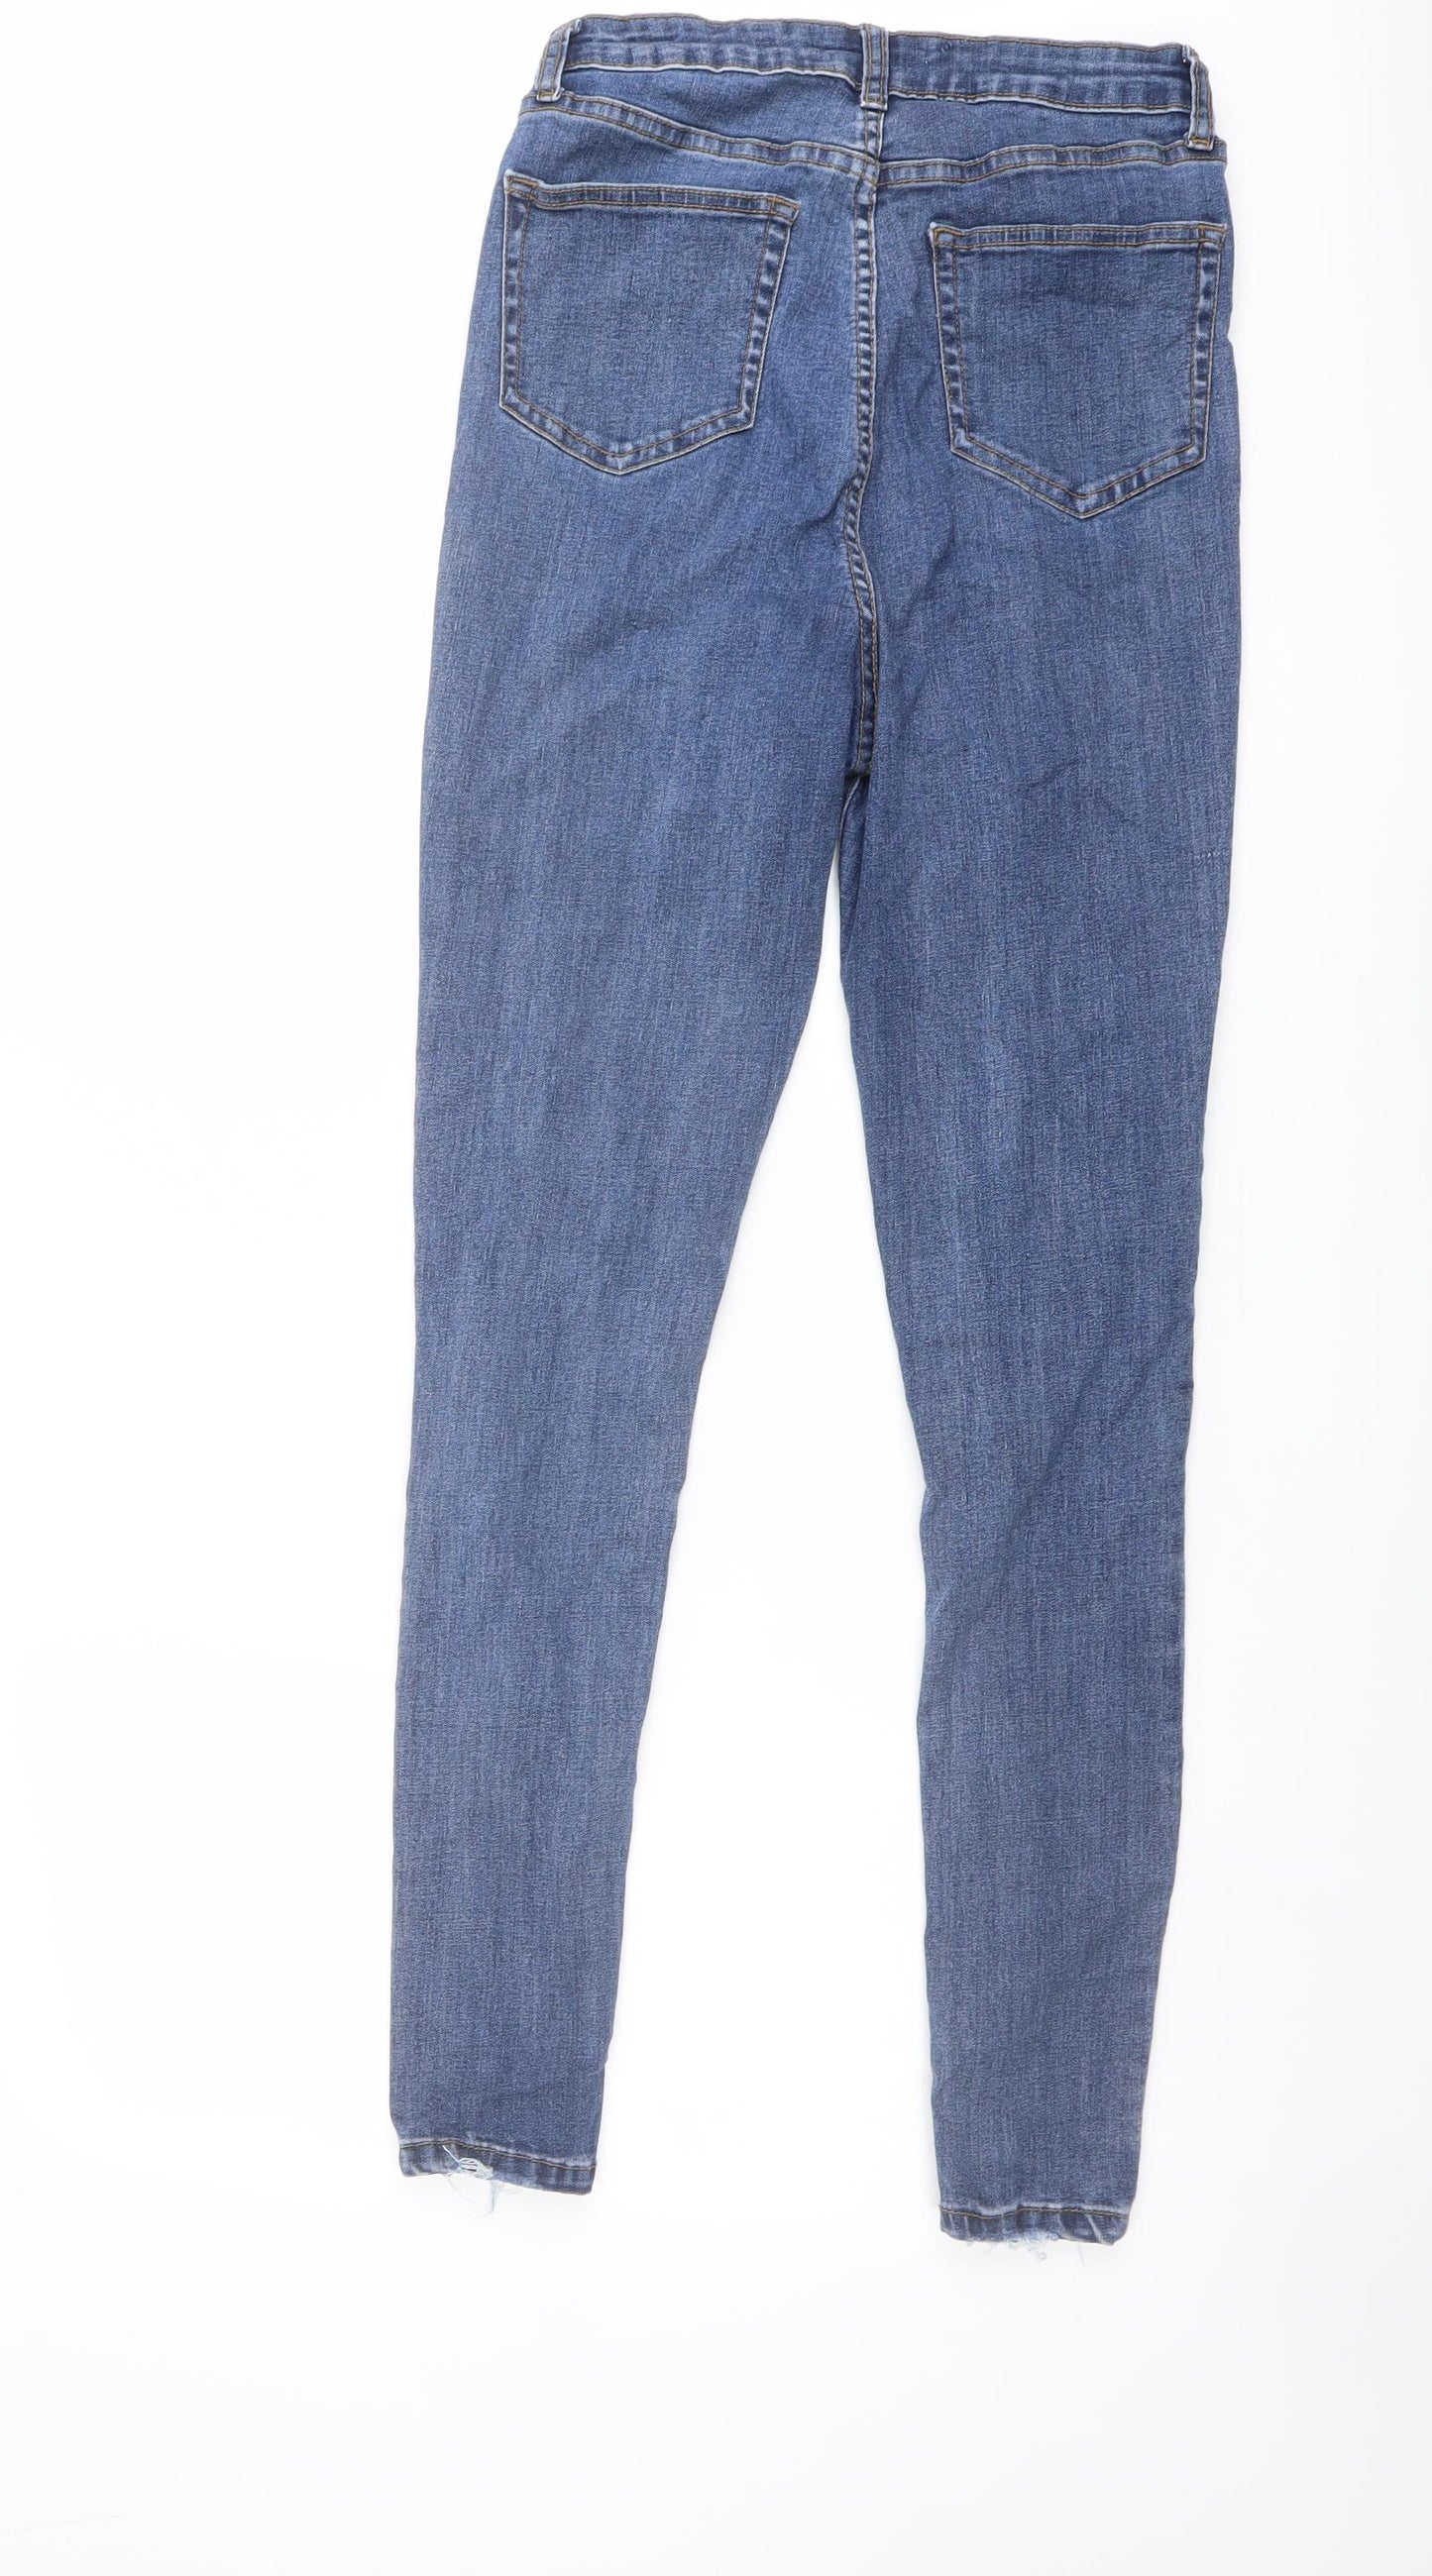 Don't Think Twice Womens Blue Cotton Skinny Jeans Size 10 L30 in Regular Button